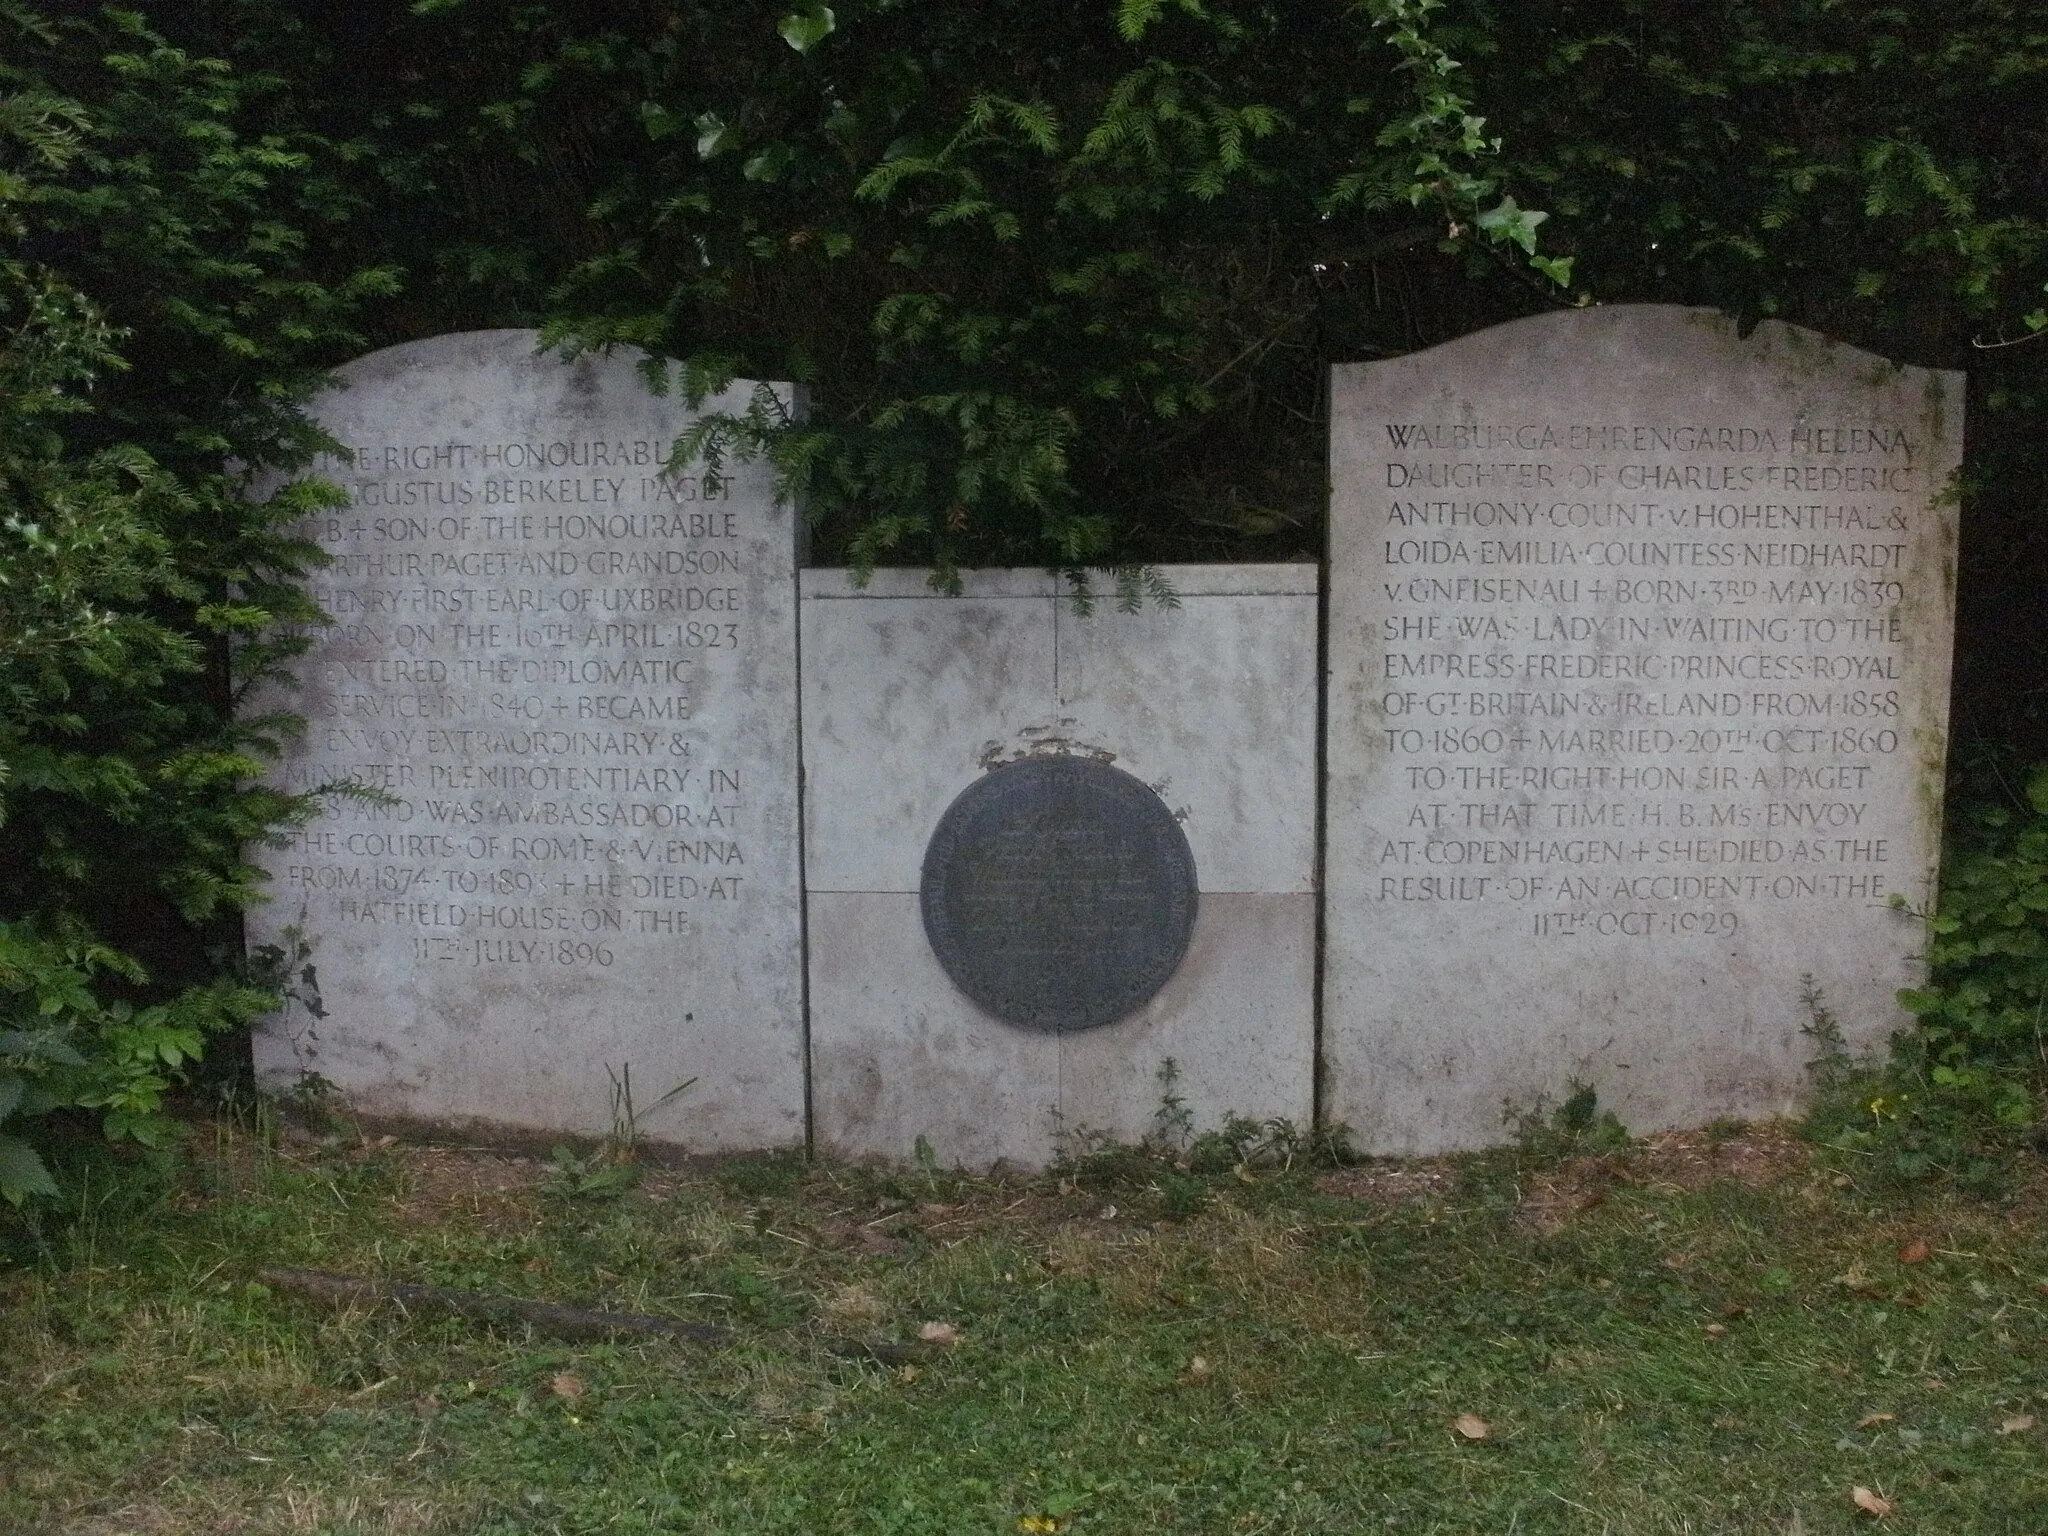 Photo showing: Paget family plot in the cemetery of Tardebigge, Worcestershire, with the graves of Sir Augustus Berkeley Paget, GCB (1823 – 1896) and his wife Walburga Ehrengarde Helena (née Countess von Hohenthal, 1839 – 1929)